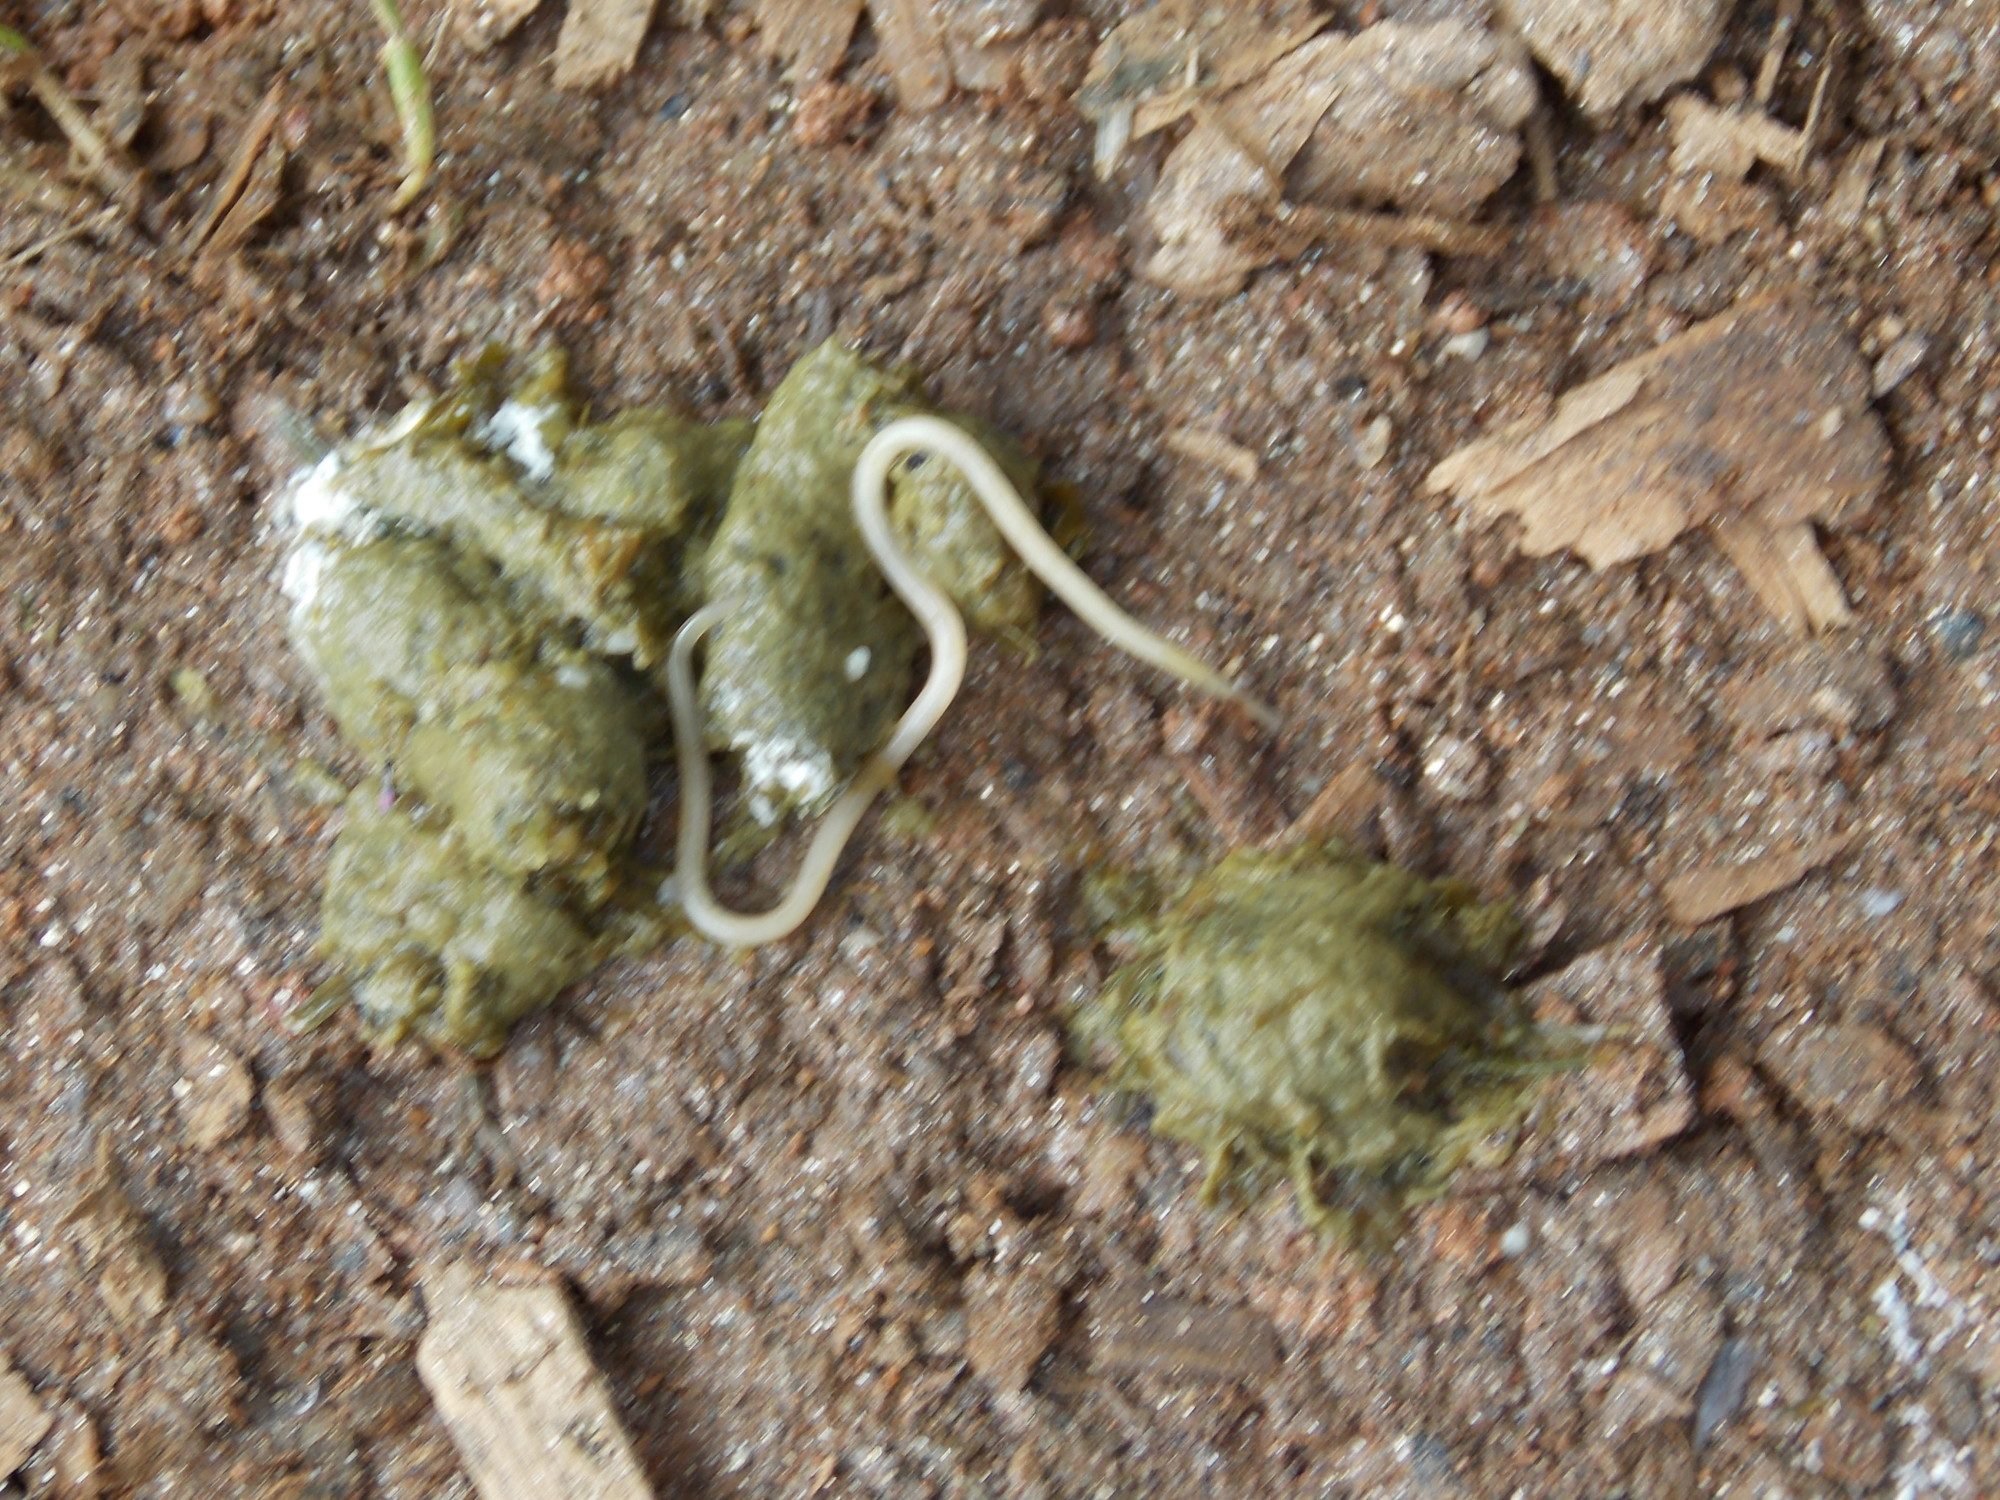 Found our first poop worm...2000 x 1500